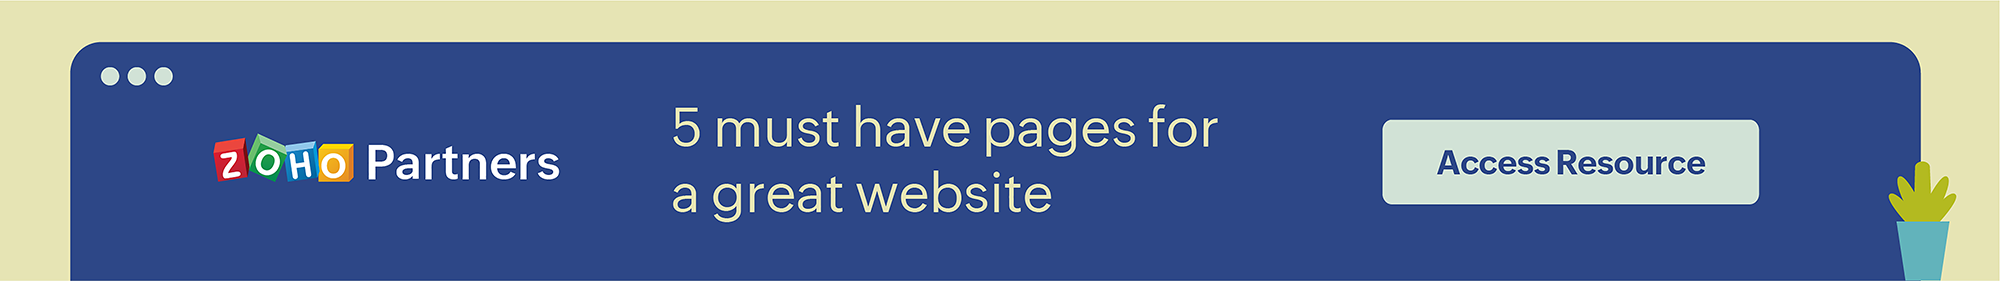 5 must have pages for your website.